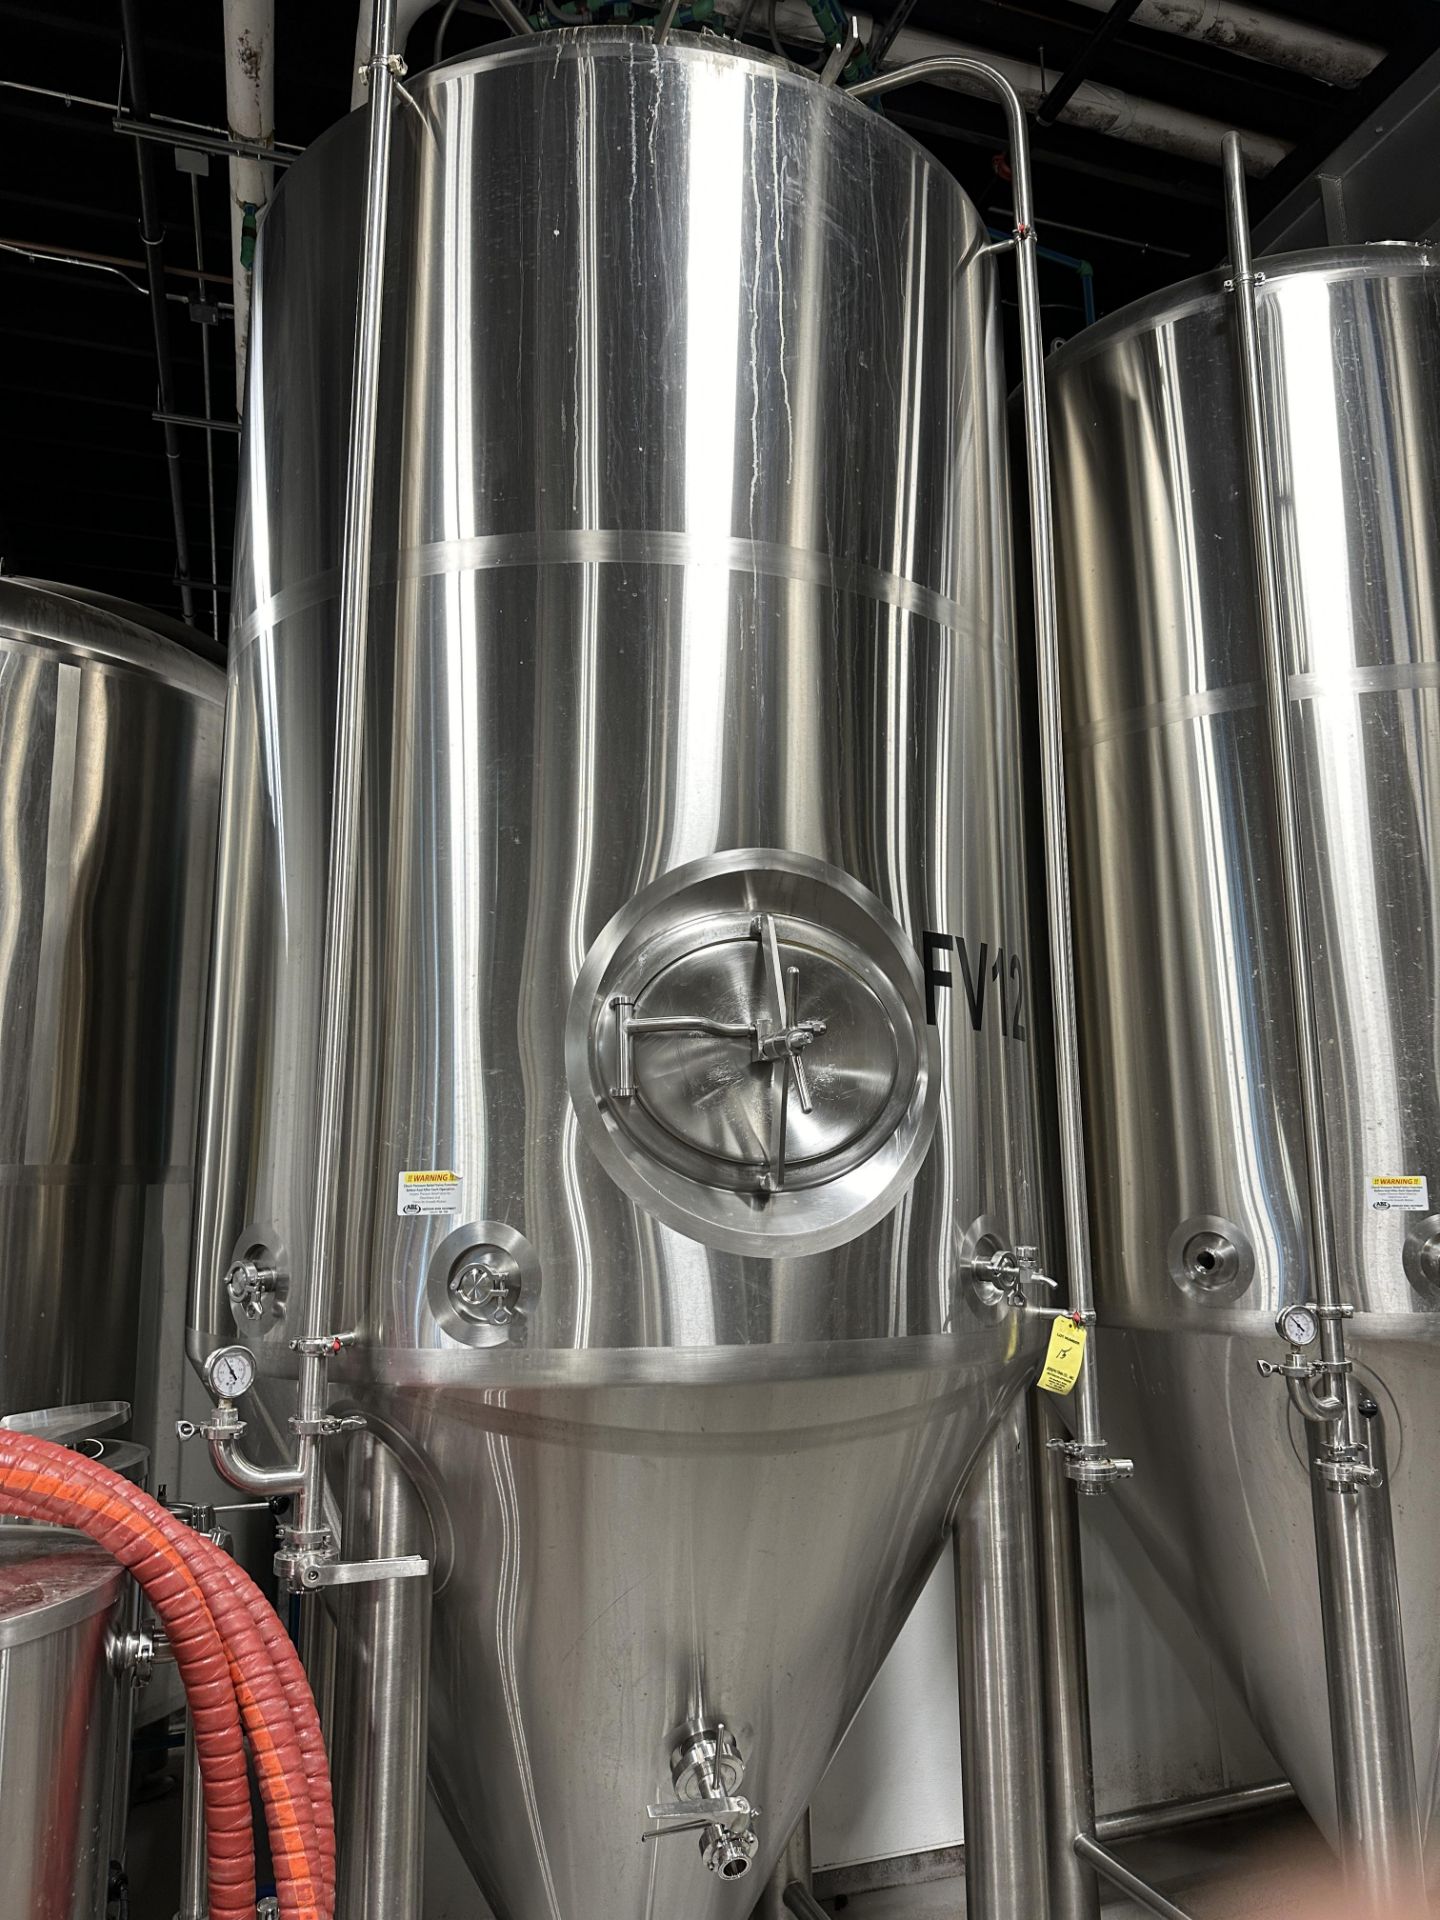 2016 ABE 30 BBL Jacketed Fermenter (FV 12), Approx. 13' H x 5' 5' OD | Rig Fee $1750 - Image 2 of 3